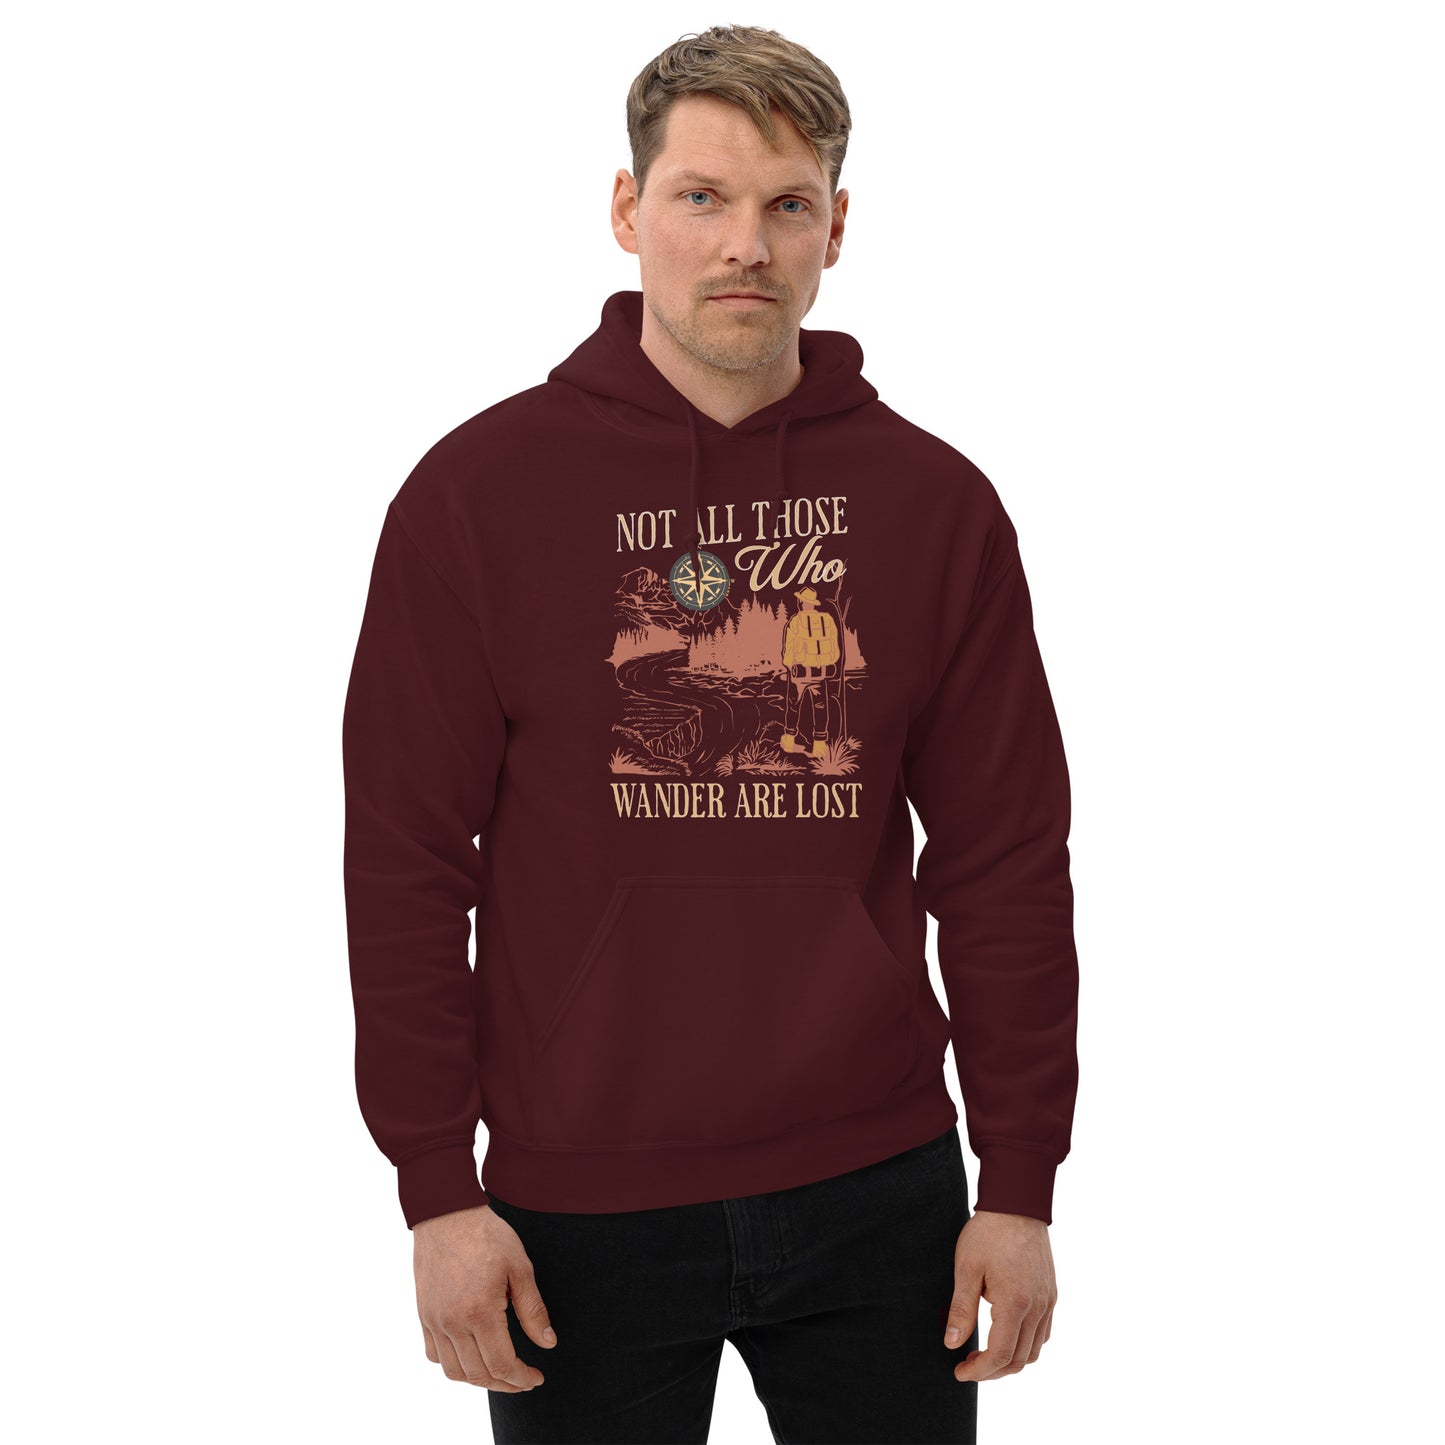 Not All Those Who Wander Are Lost Unisex Hoodie